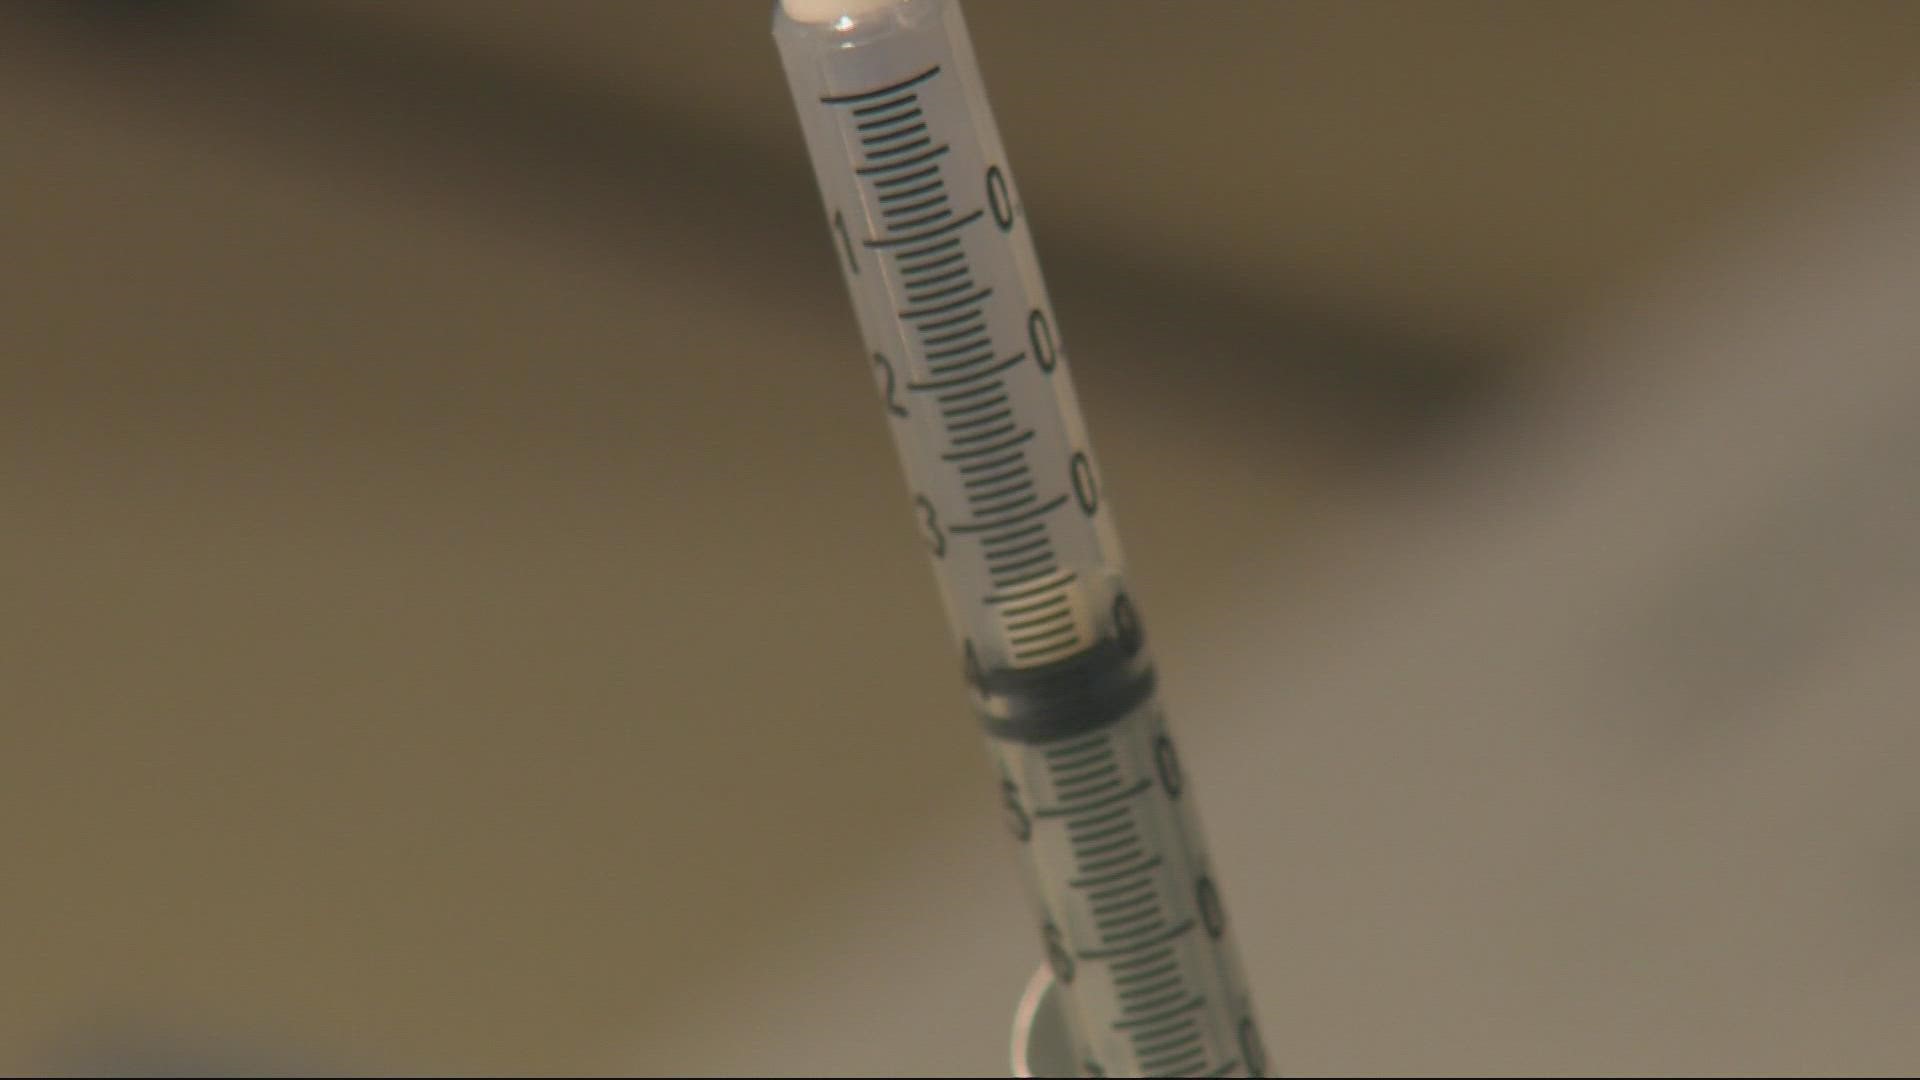 Oregon's health leaders confirm there's significantly more vaccine available for kids than there was for adults during the initial rollout. Galen Ettlin reports.